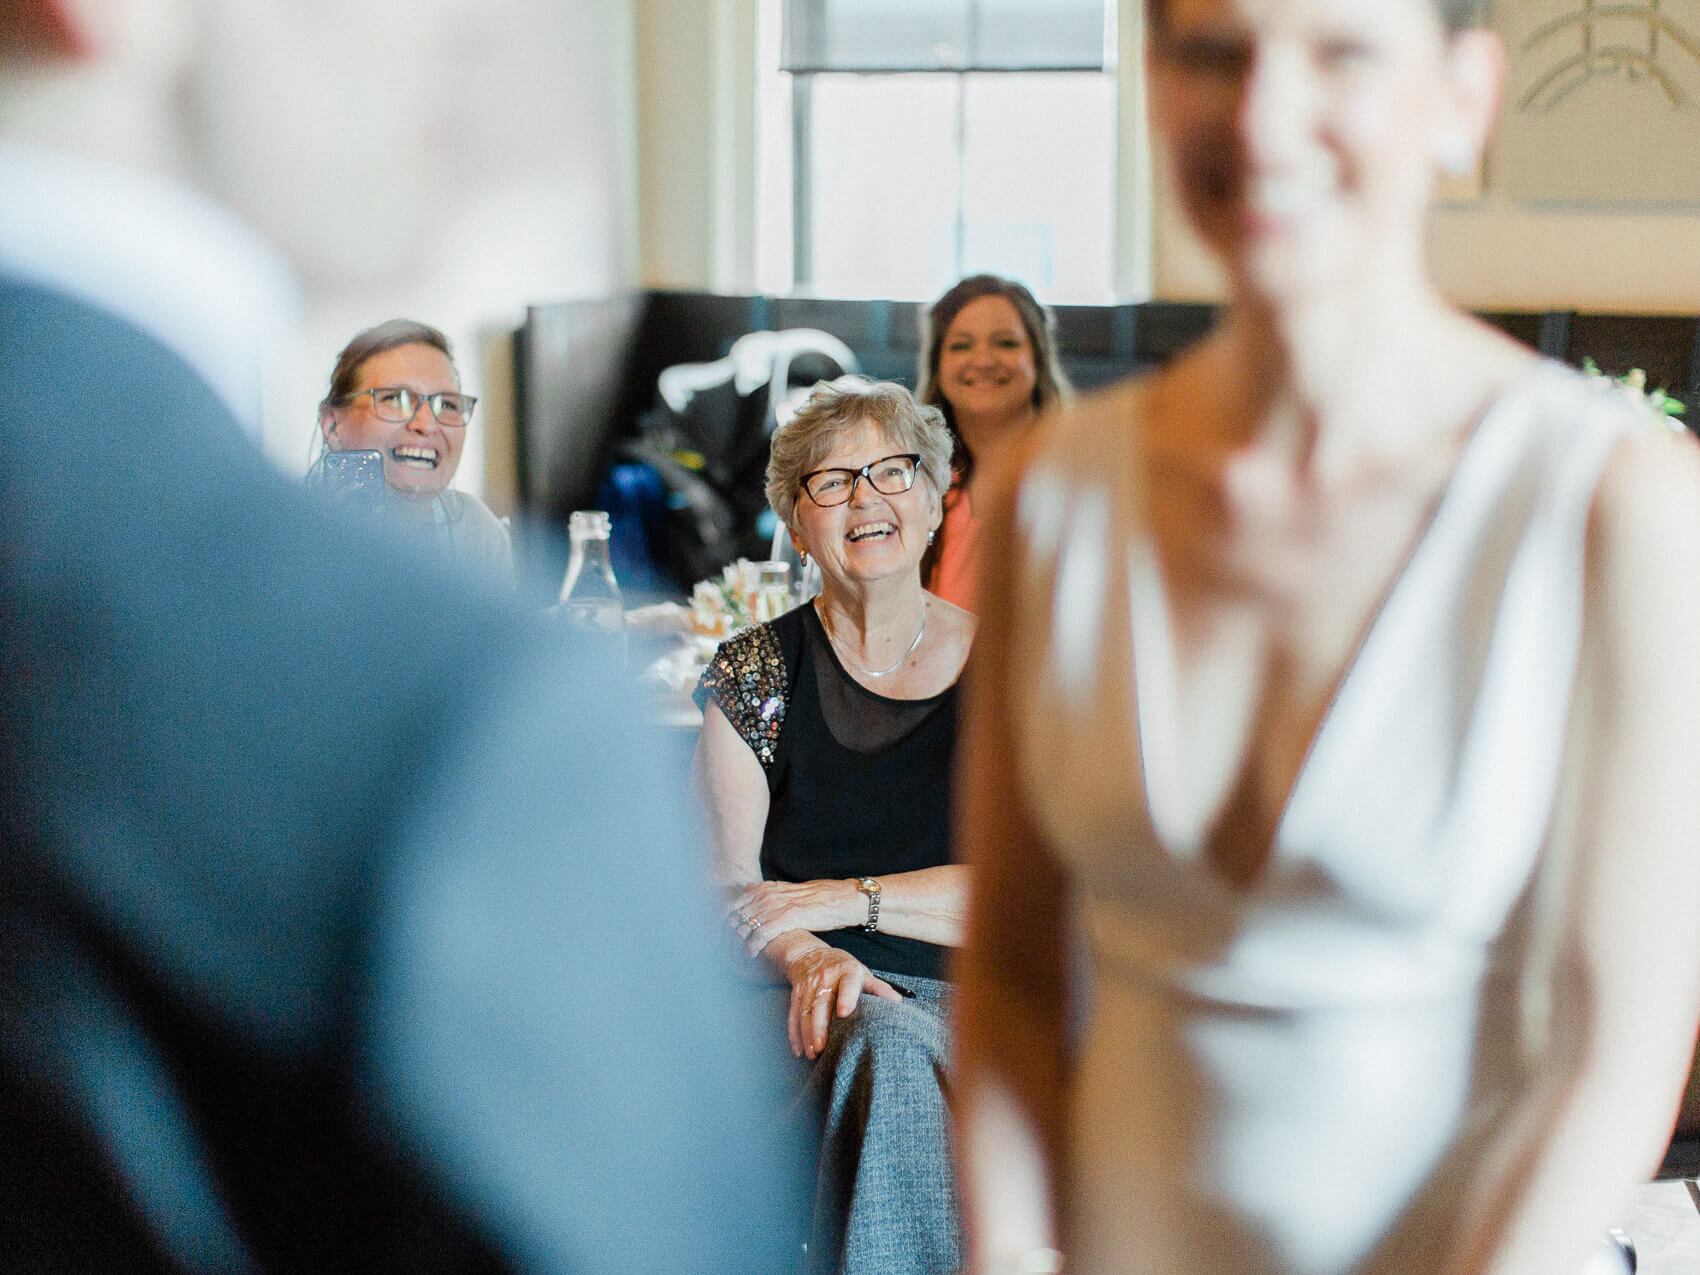 candid emotional wedding ceremony moment at an intimate downtown toronto wedding at terroni restaurant